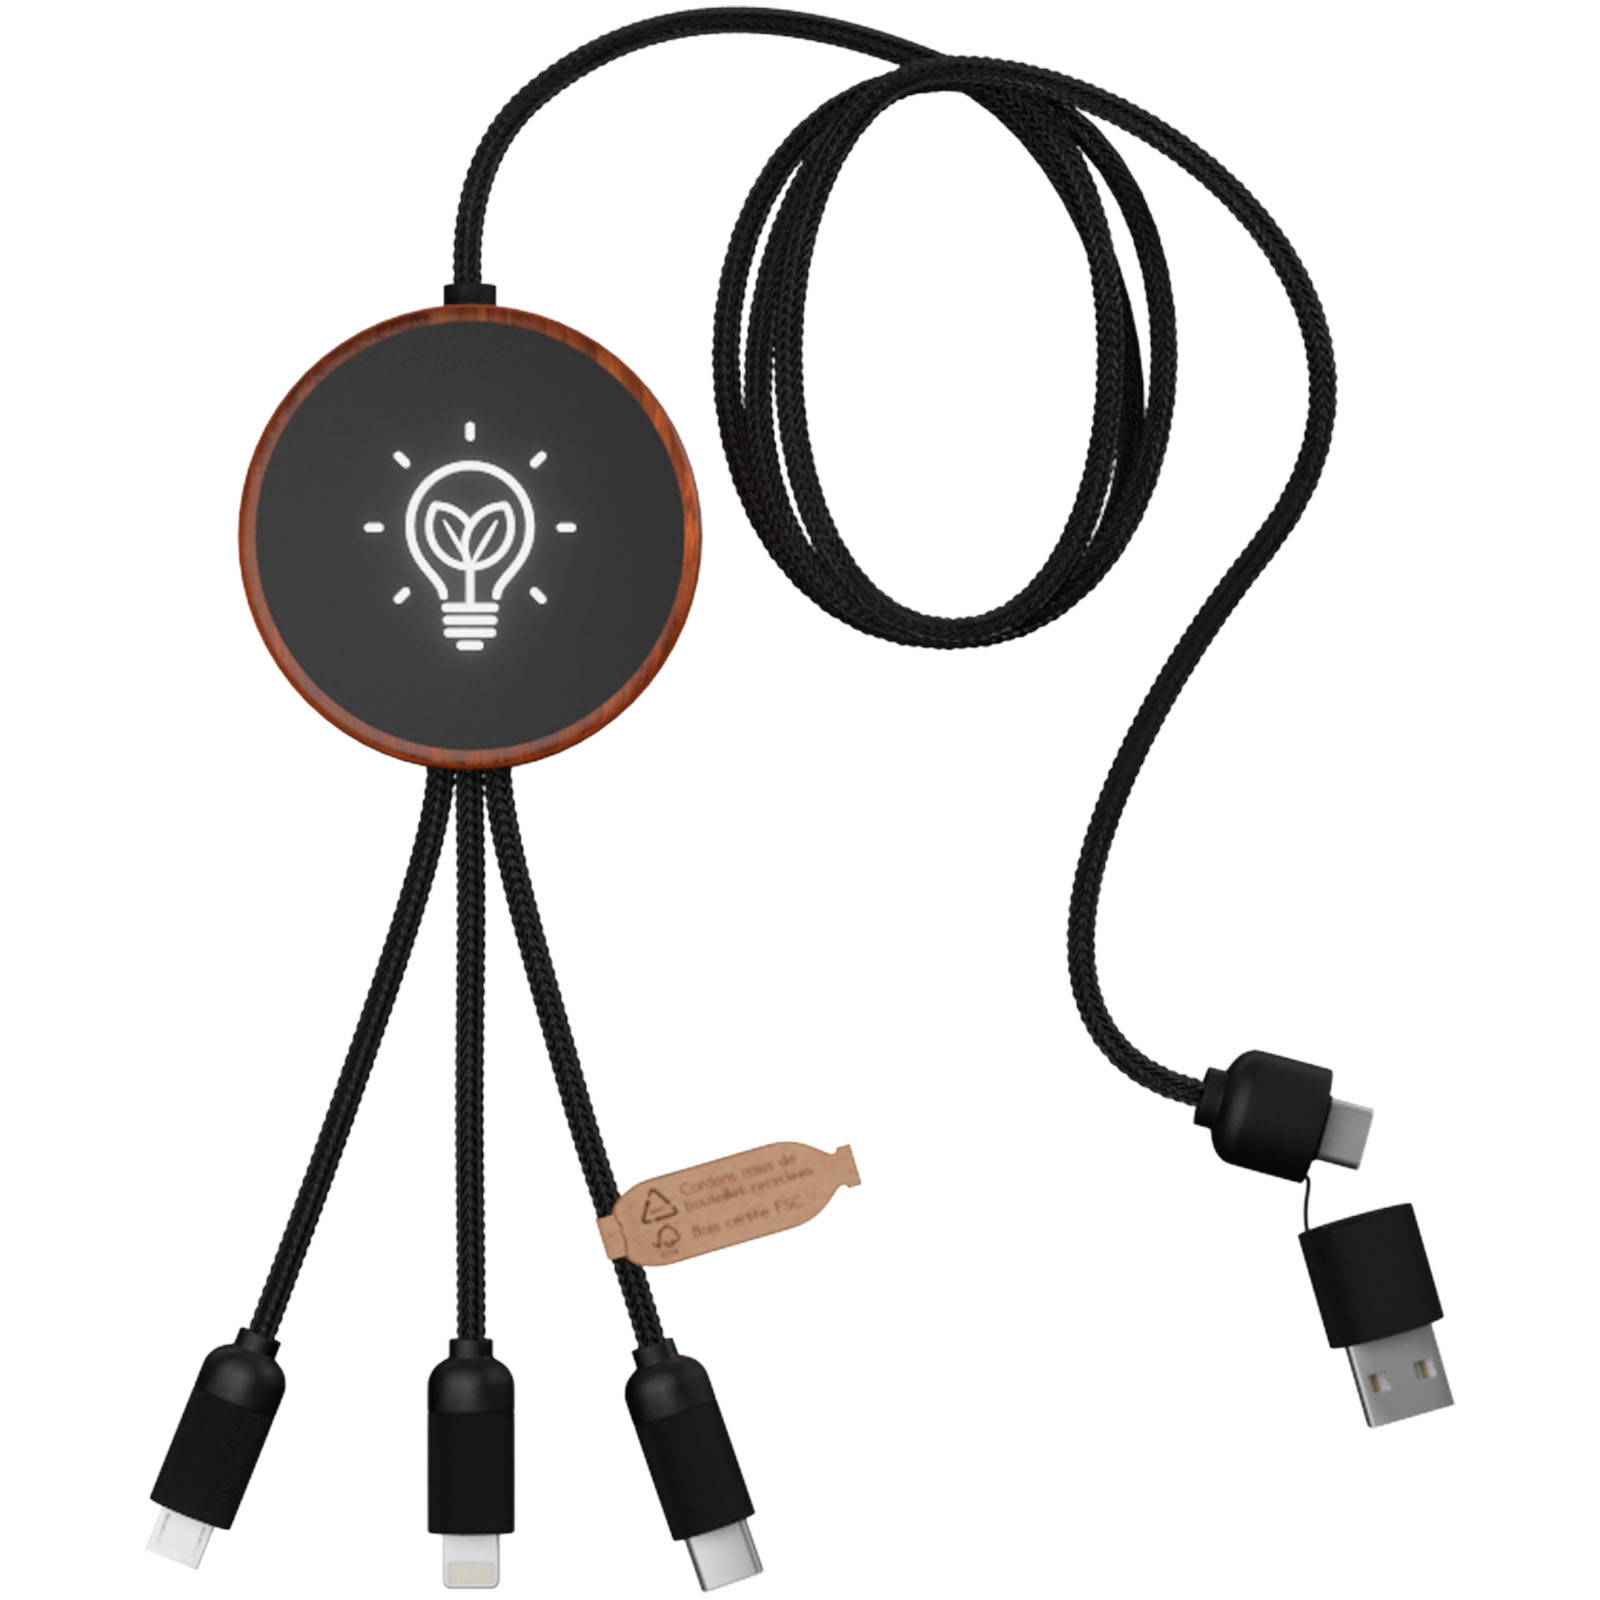 A 5-in-1 charging cable made from recycled PET that features a light-up logo, along with a 10W Bamboo charging pad - Meopham